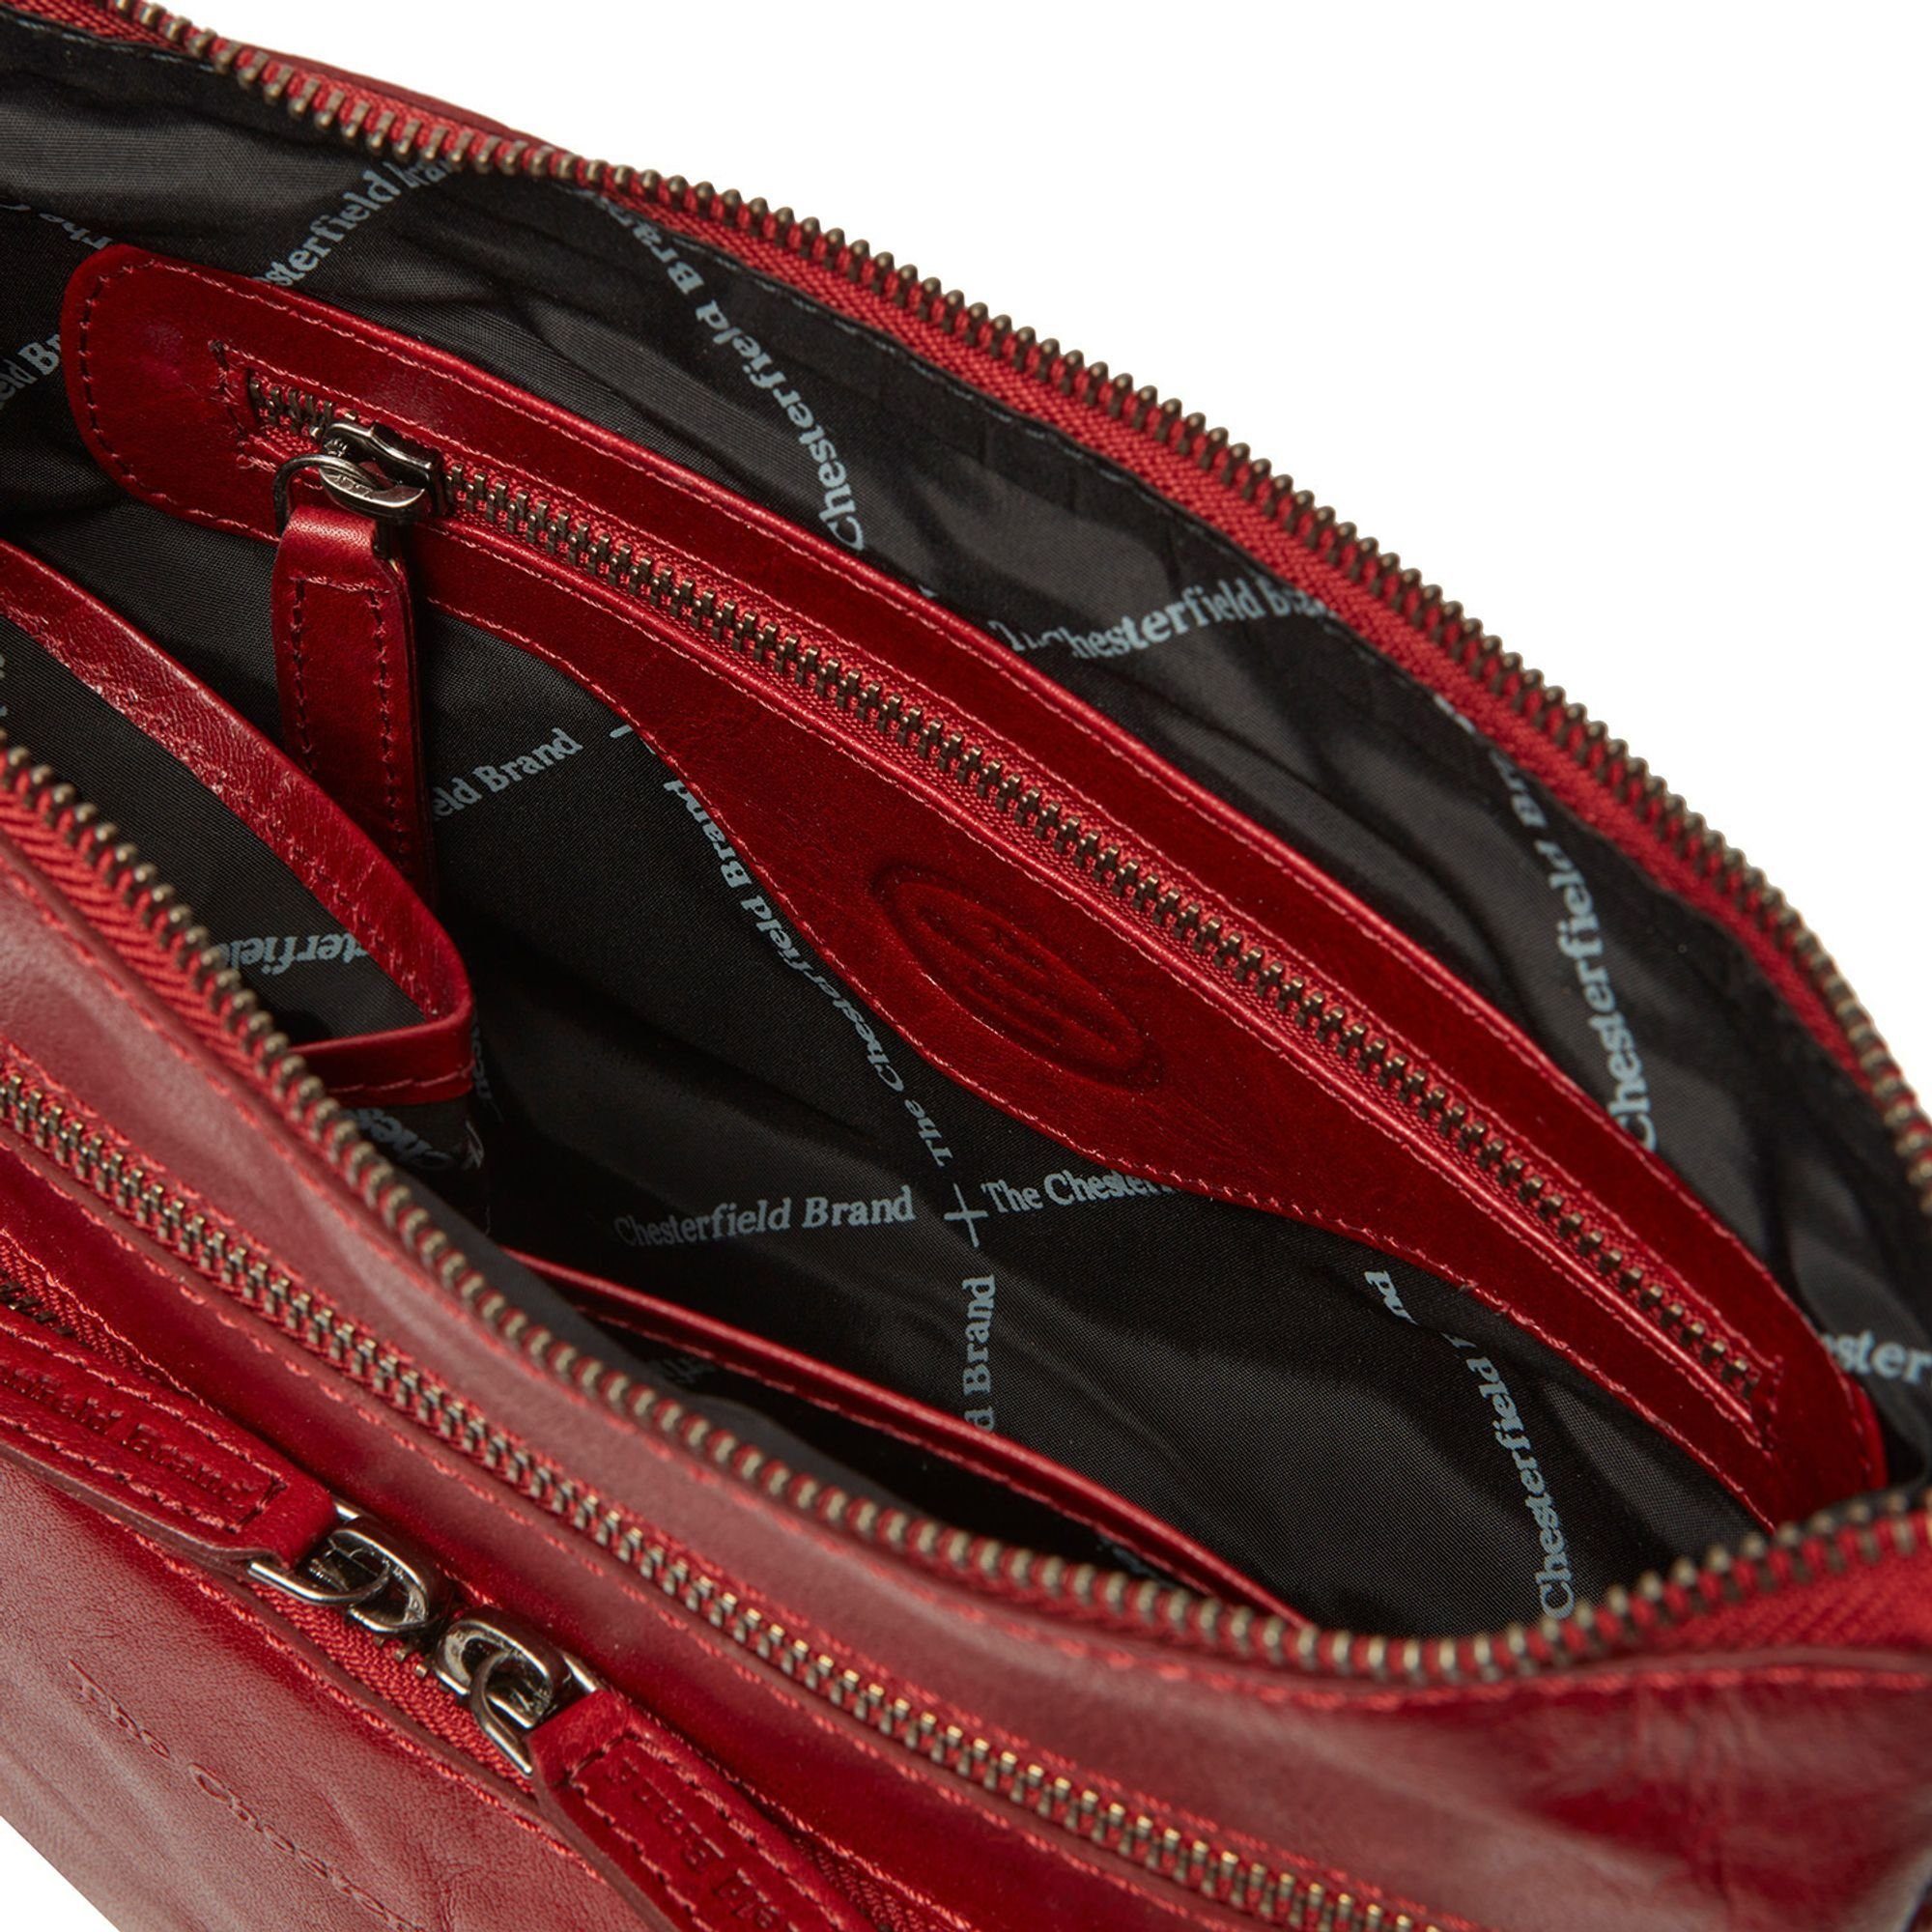 Schultertasche Leder Brand The Chesterfield red Tula,